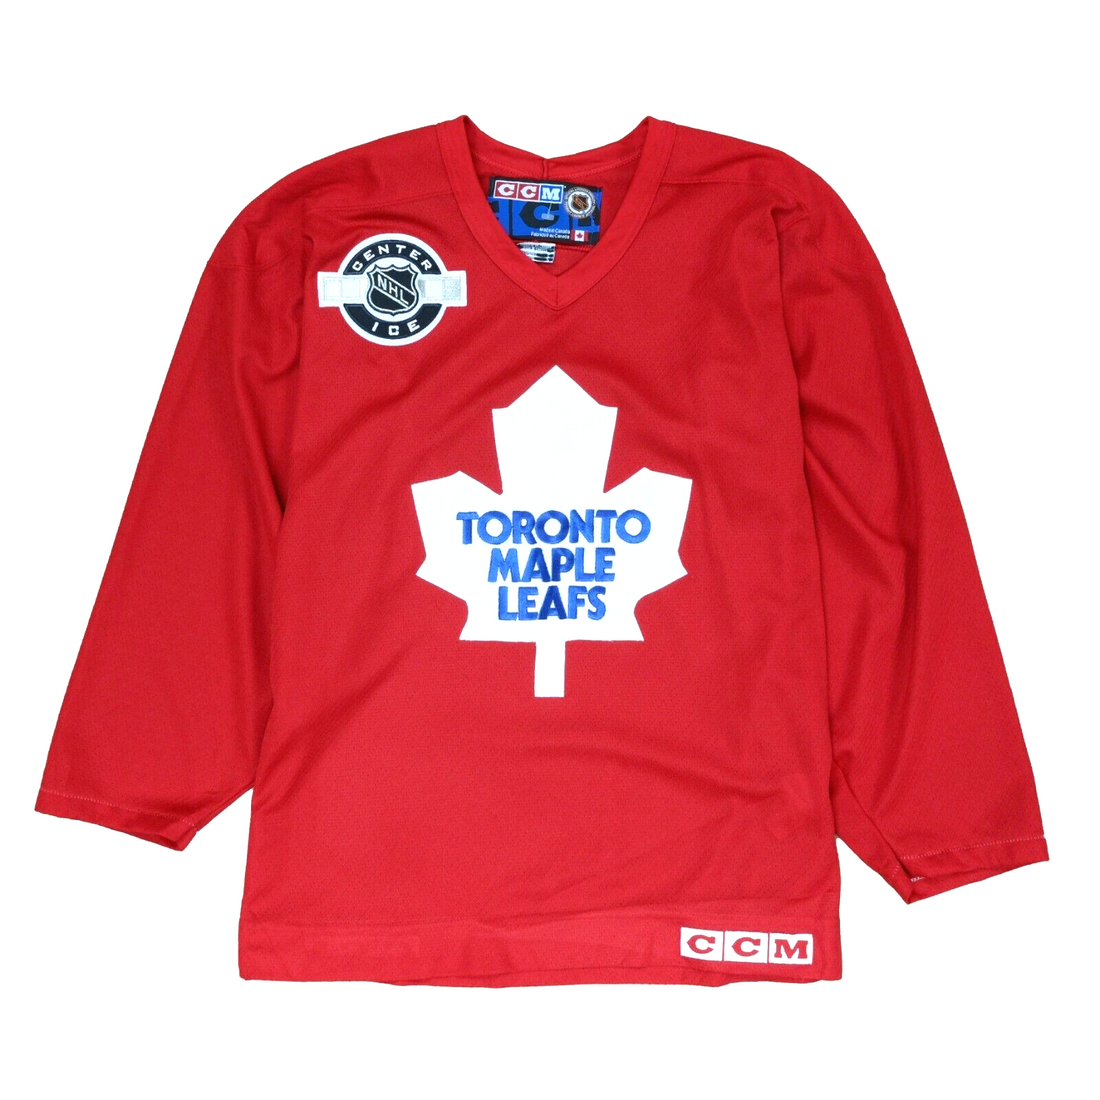 Vintage Toronto Maple Leafs CCM Center Ice Hockey Jersey Size Small Red NHL